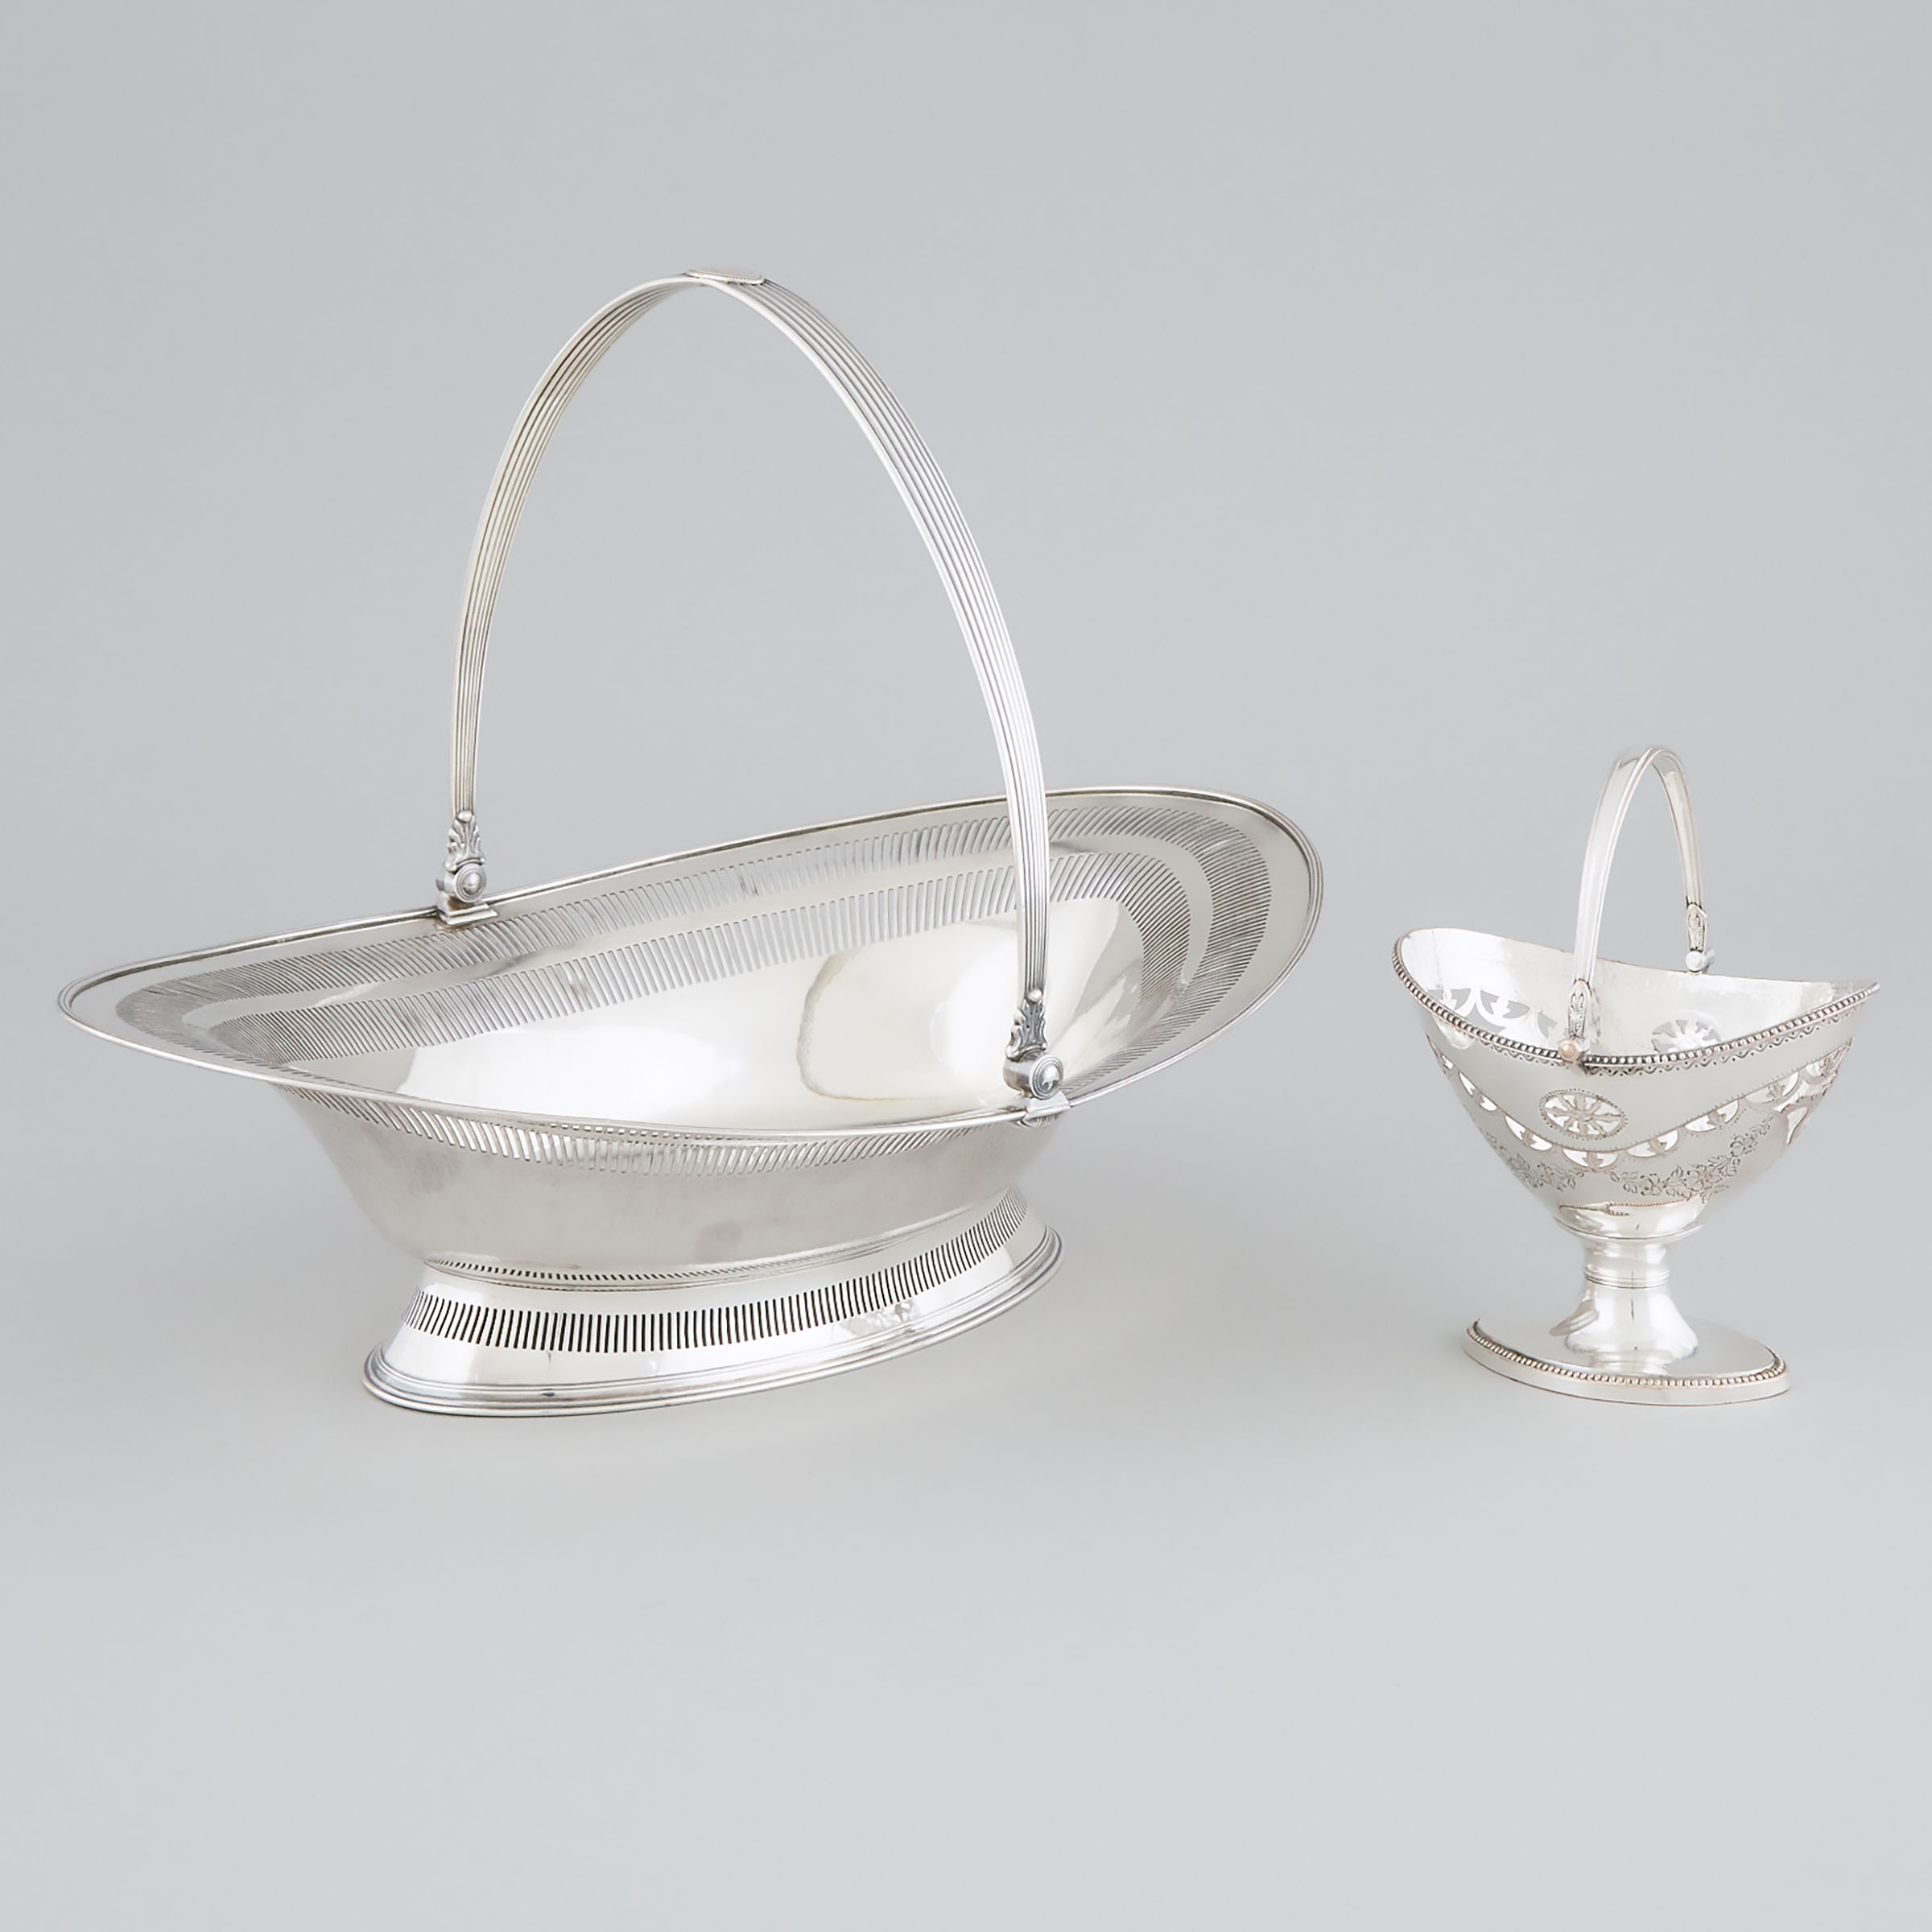 Edwardian Silver Plated Cake Basket and a Pierced Sugar Basket, late 19th/early 20th century